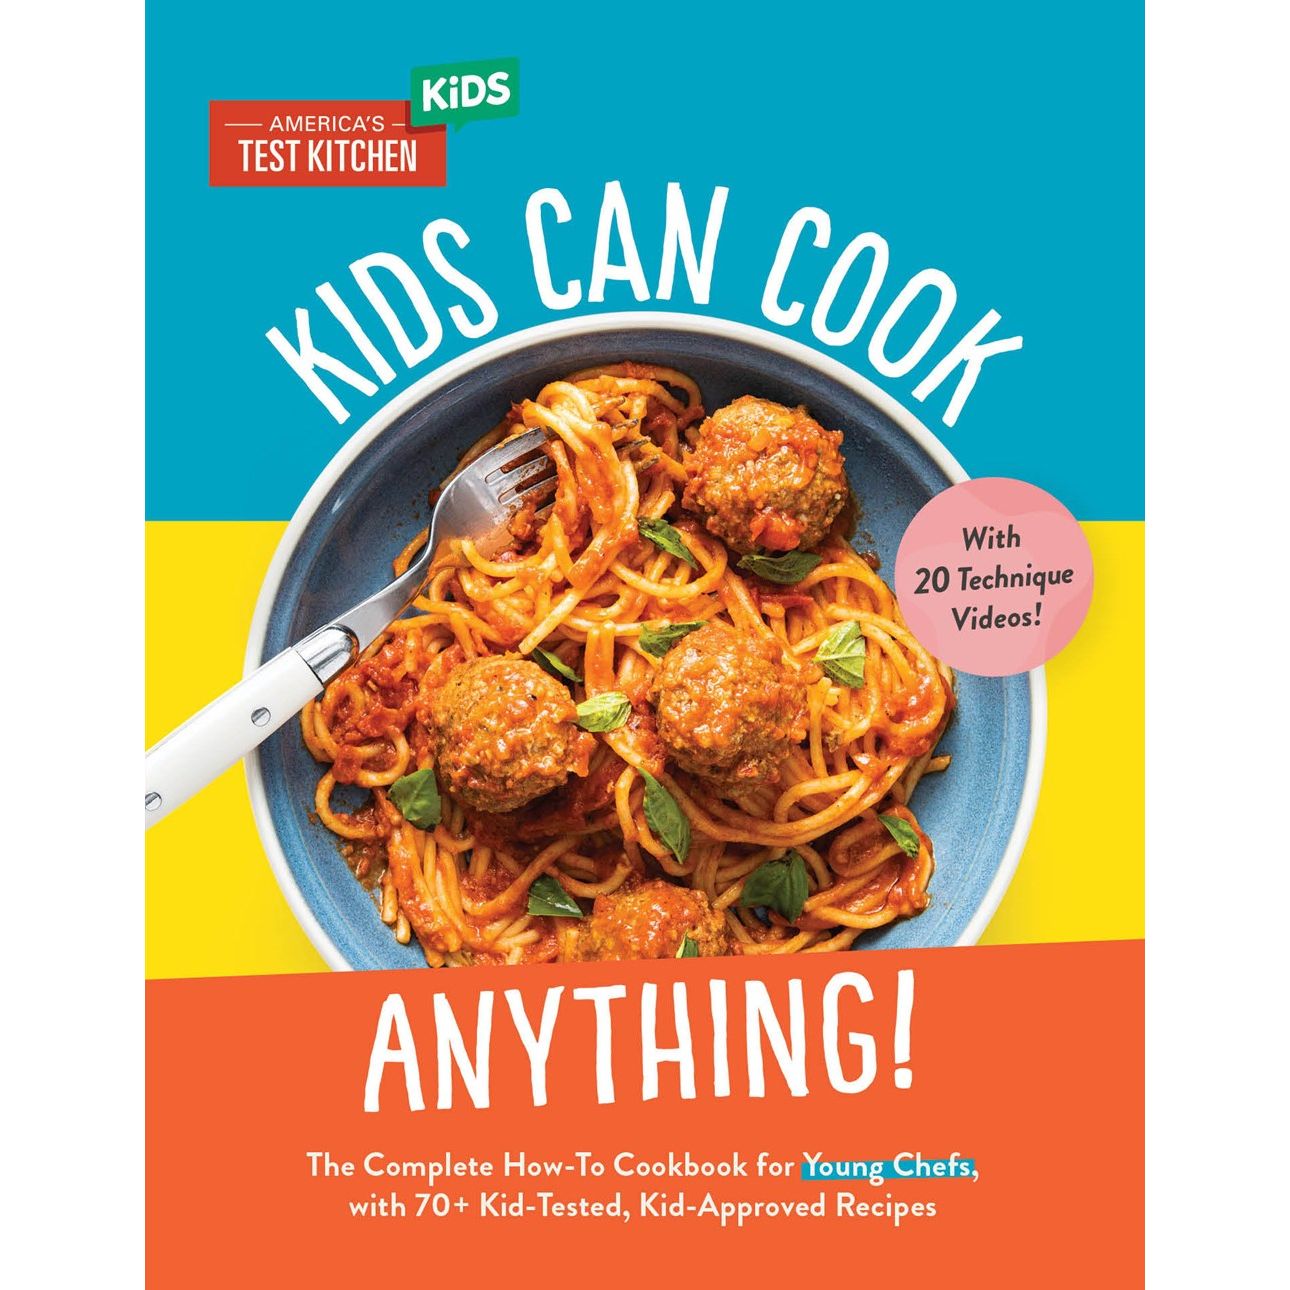 Kids Can Cook Anything! (America's Test Kitchen)